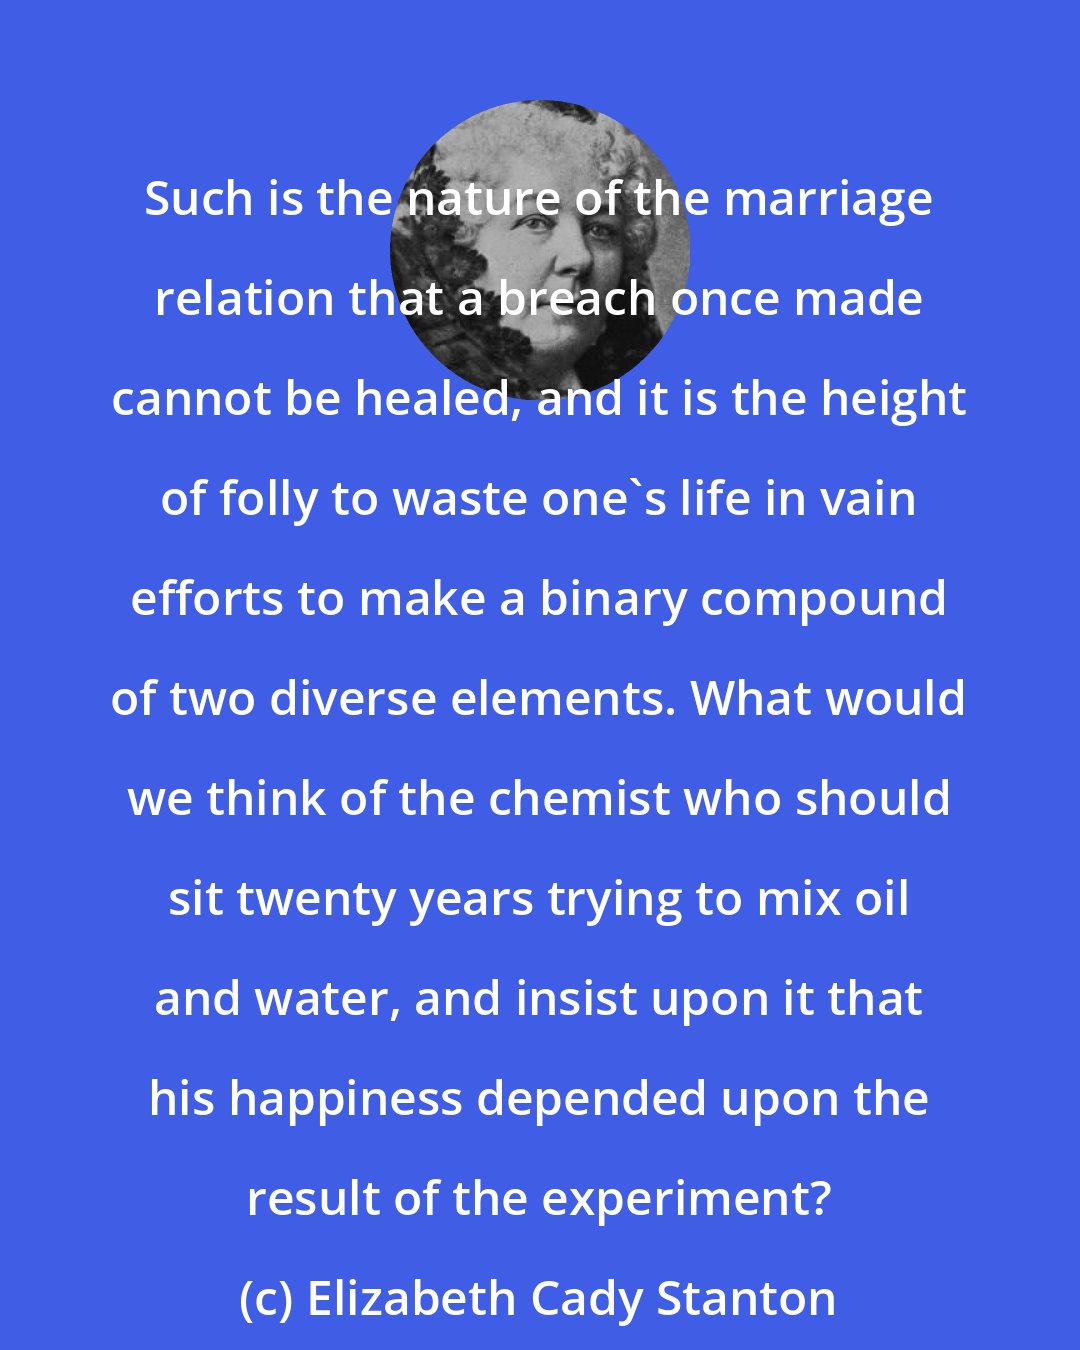 Elizabeth Cady Stanton: Such is the nature of the marriage relation that a breach once made cannot be healed, and it is the height of folly to waste one's life in vain efforts to make a binary compound of two diverse elements. What would we think of the chemist who should sit twenty years trying to mix oil and water, and insist upon it that his happiness depended upon the result of the experiment?